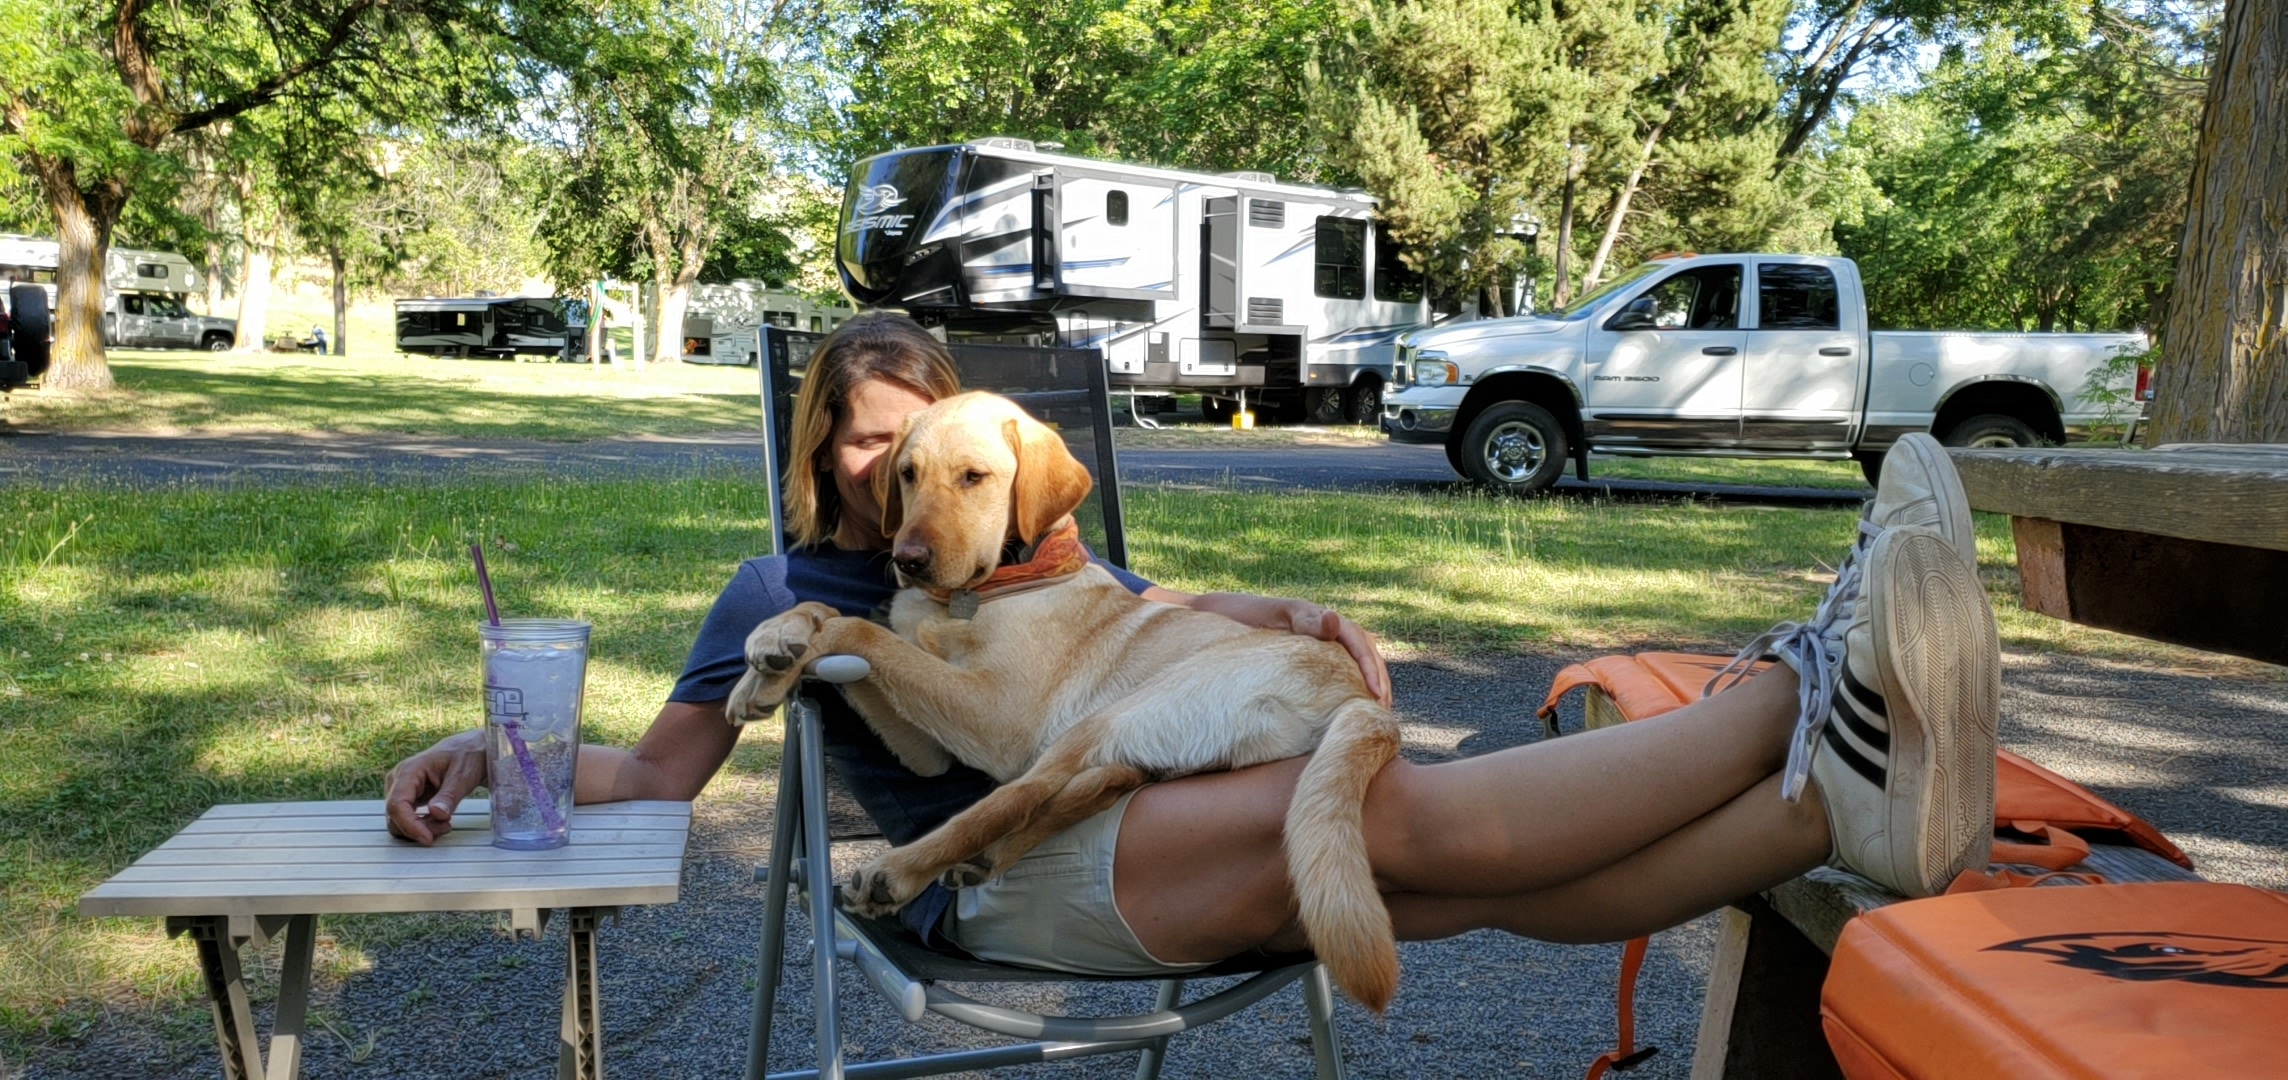 Dog sitting in a Woman's lap in a Camp Chair at an RV Park